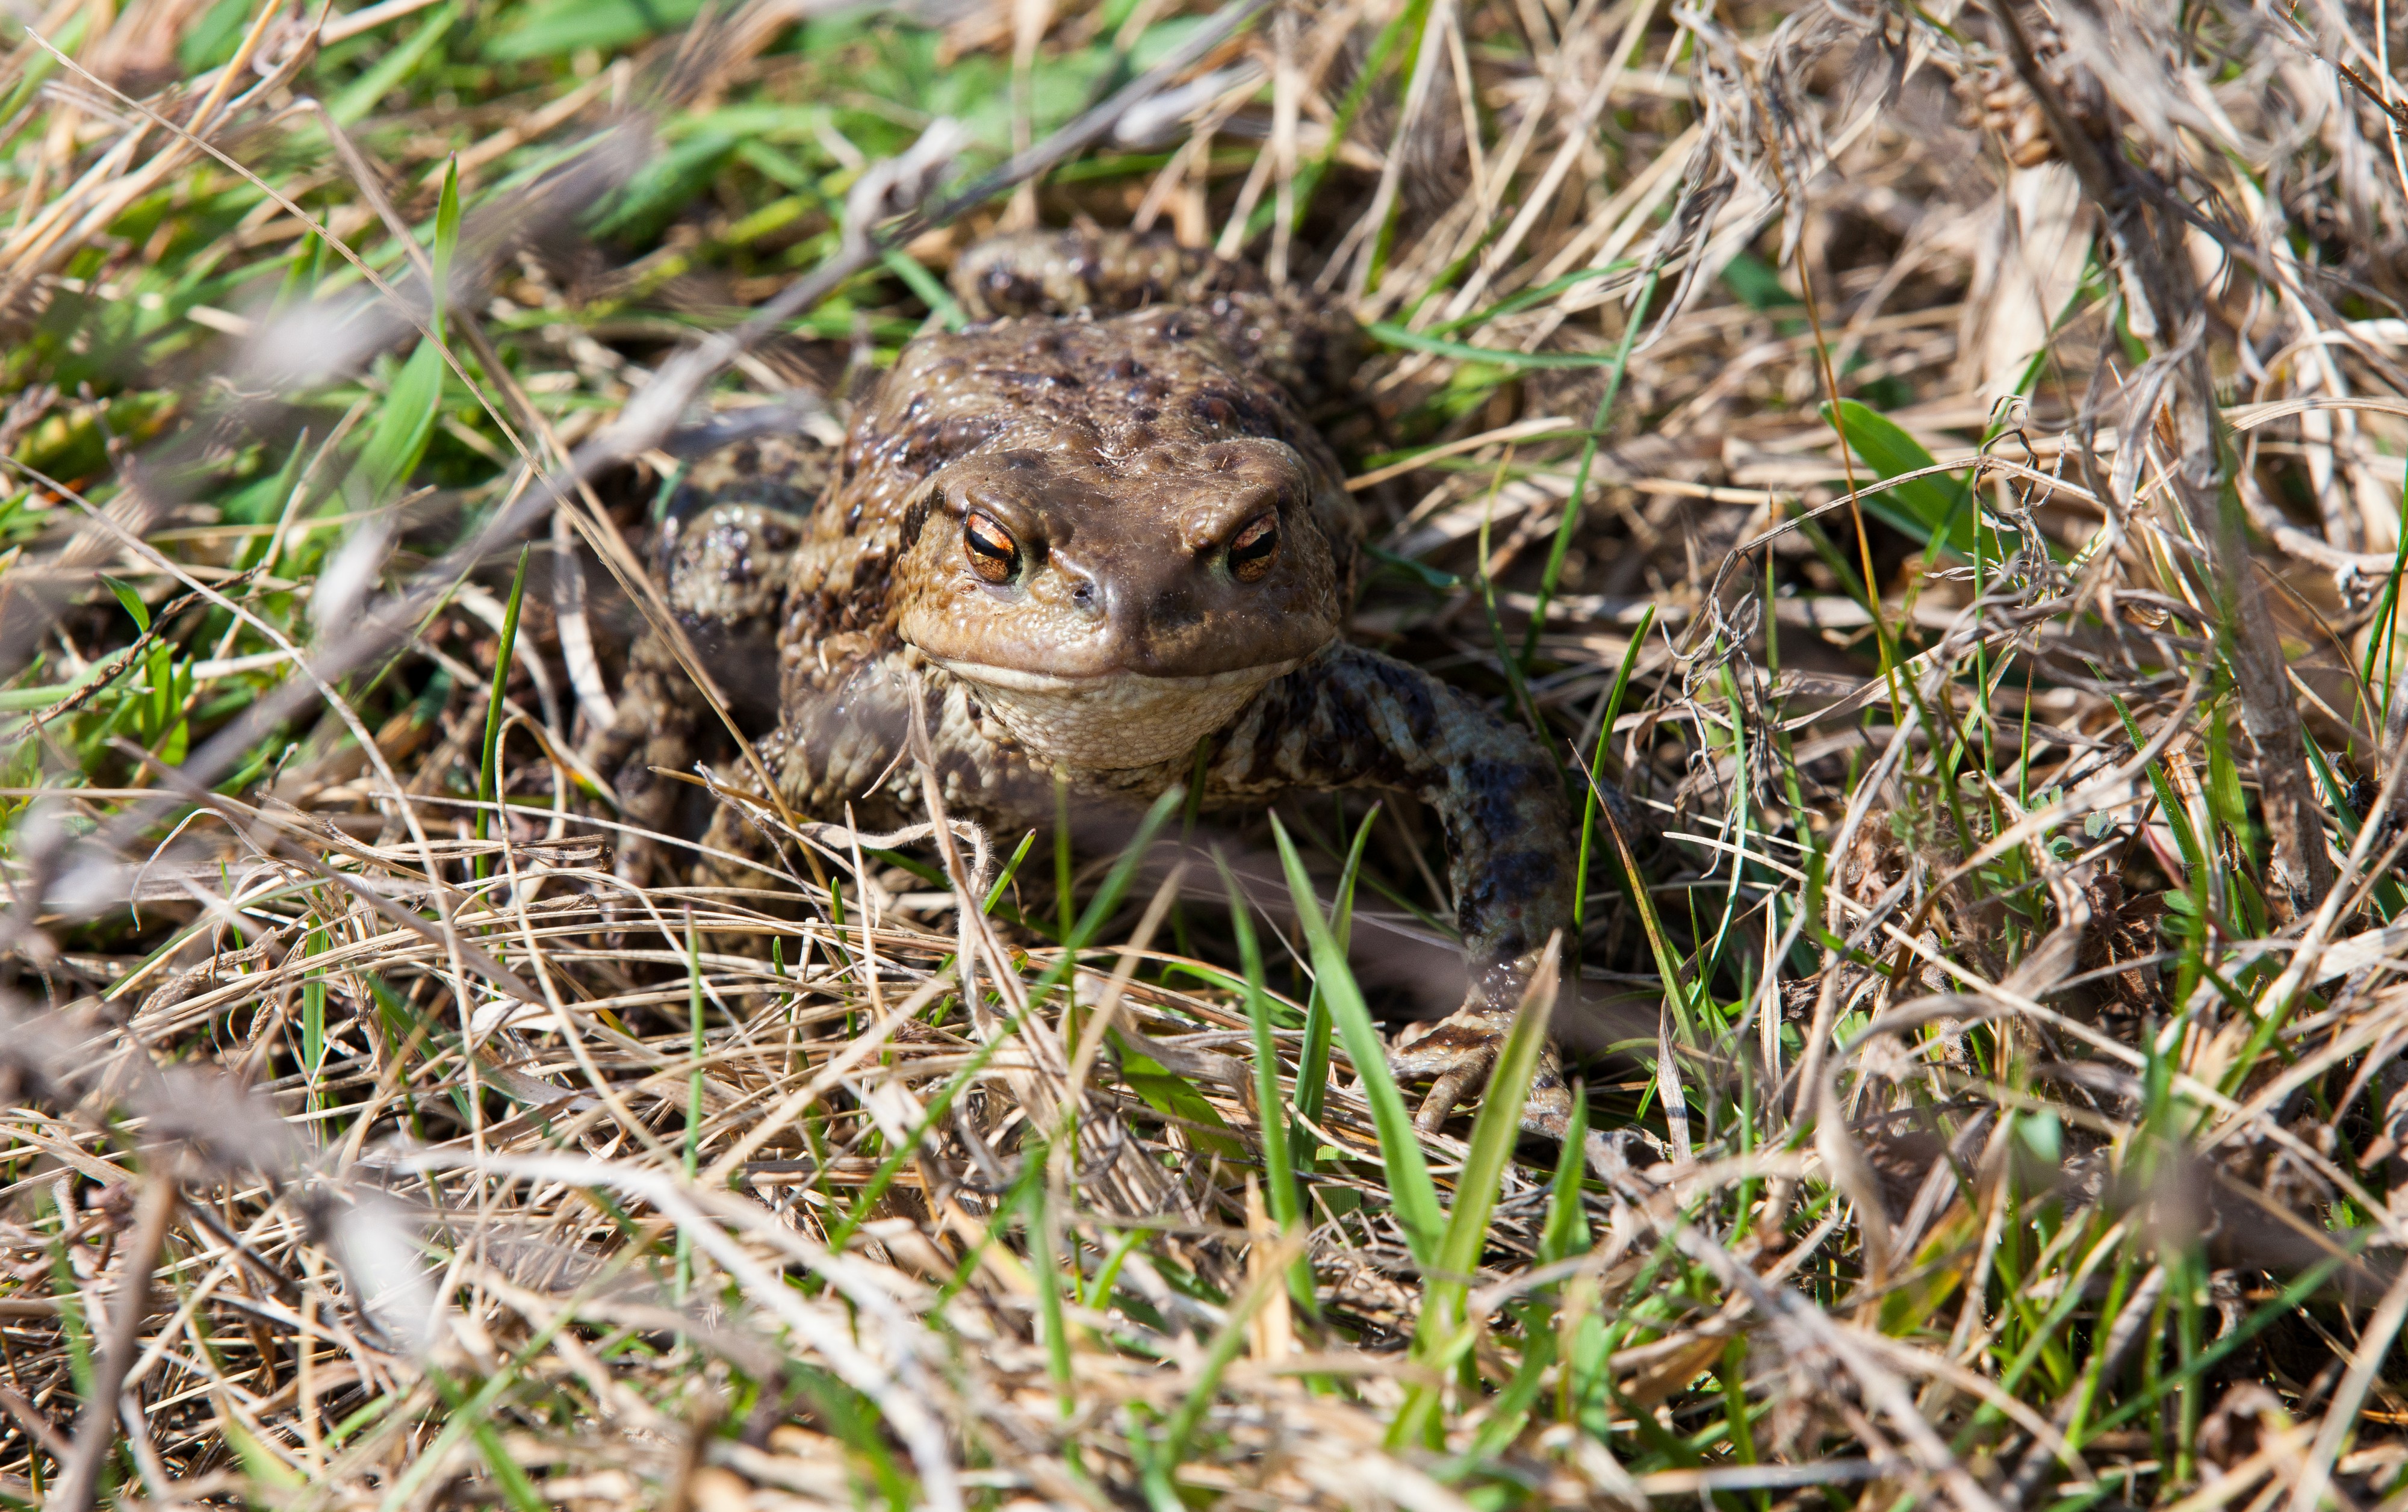 a frog in Lviv region of Ukraine in March 2014, picture 2/2